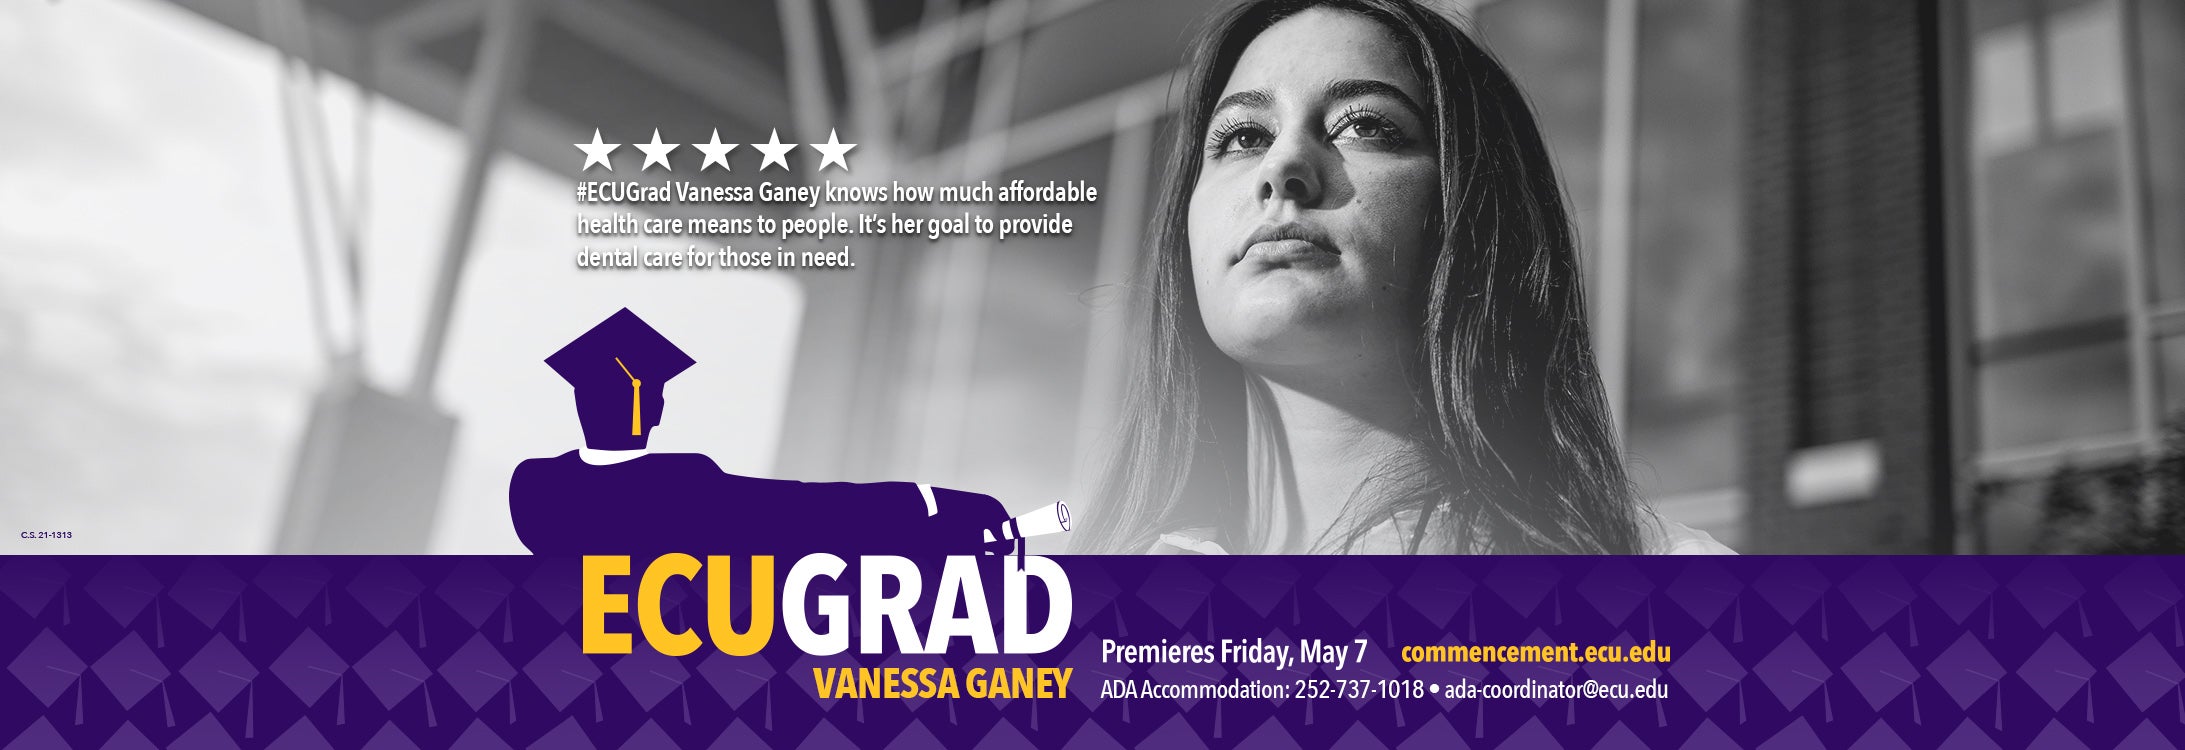 ECU graduate Vanessa Ganey knows how much affordable health care means to people. It's her goal to provide dental care for those in need.